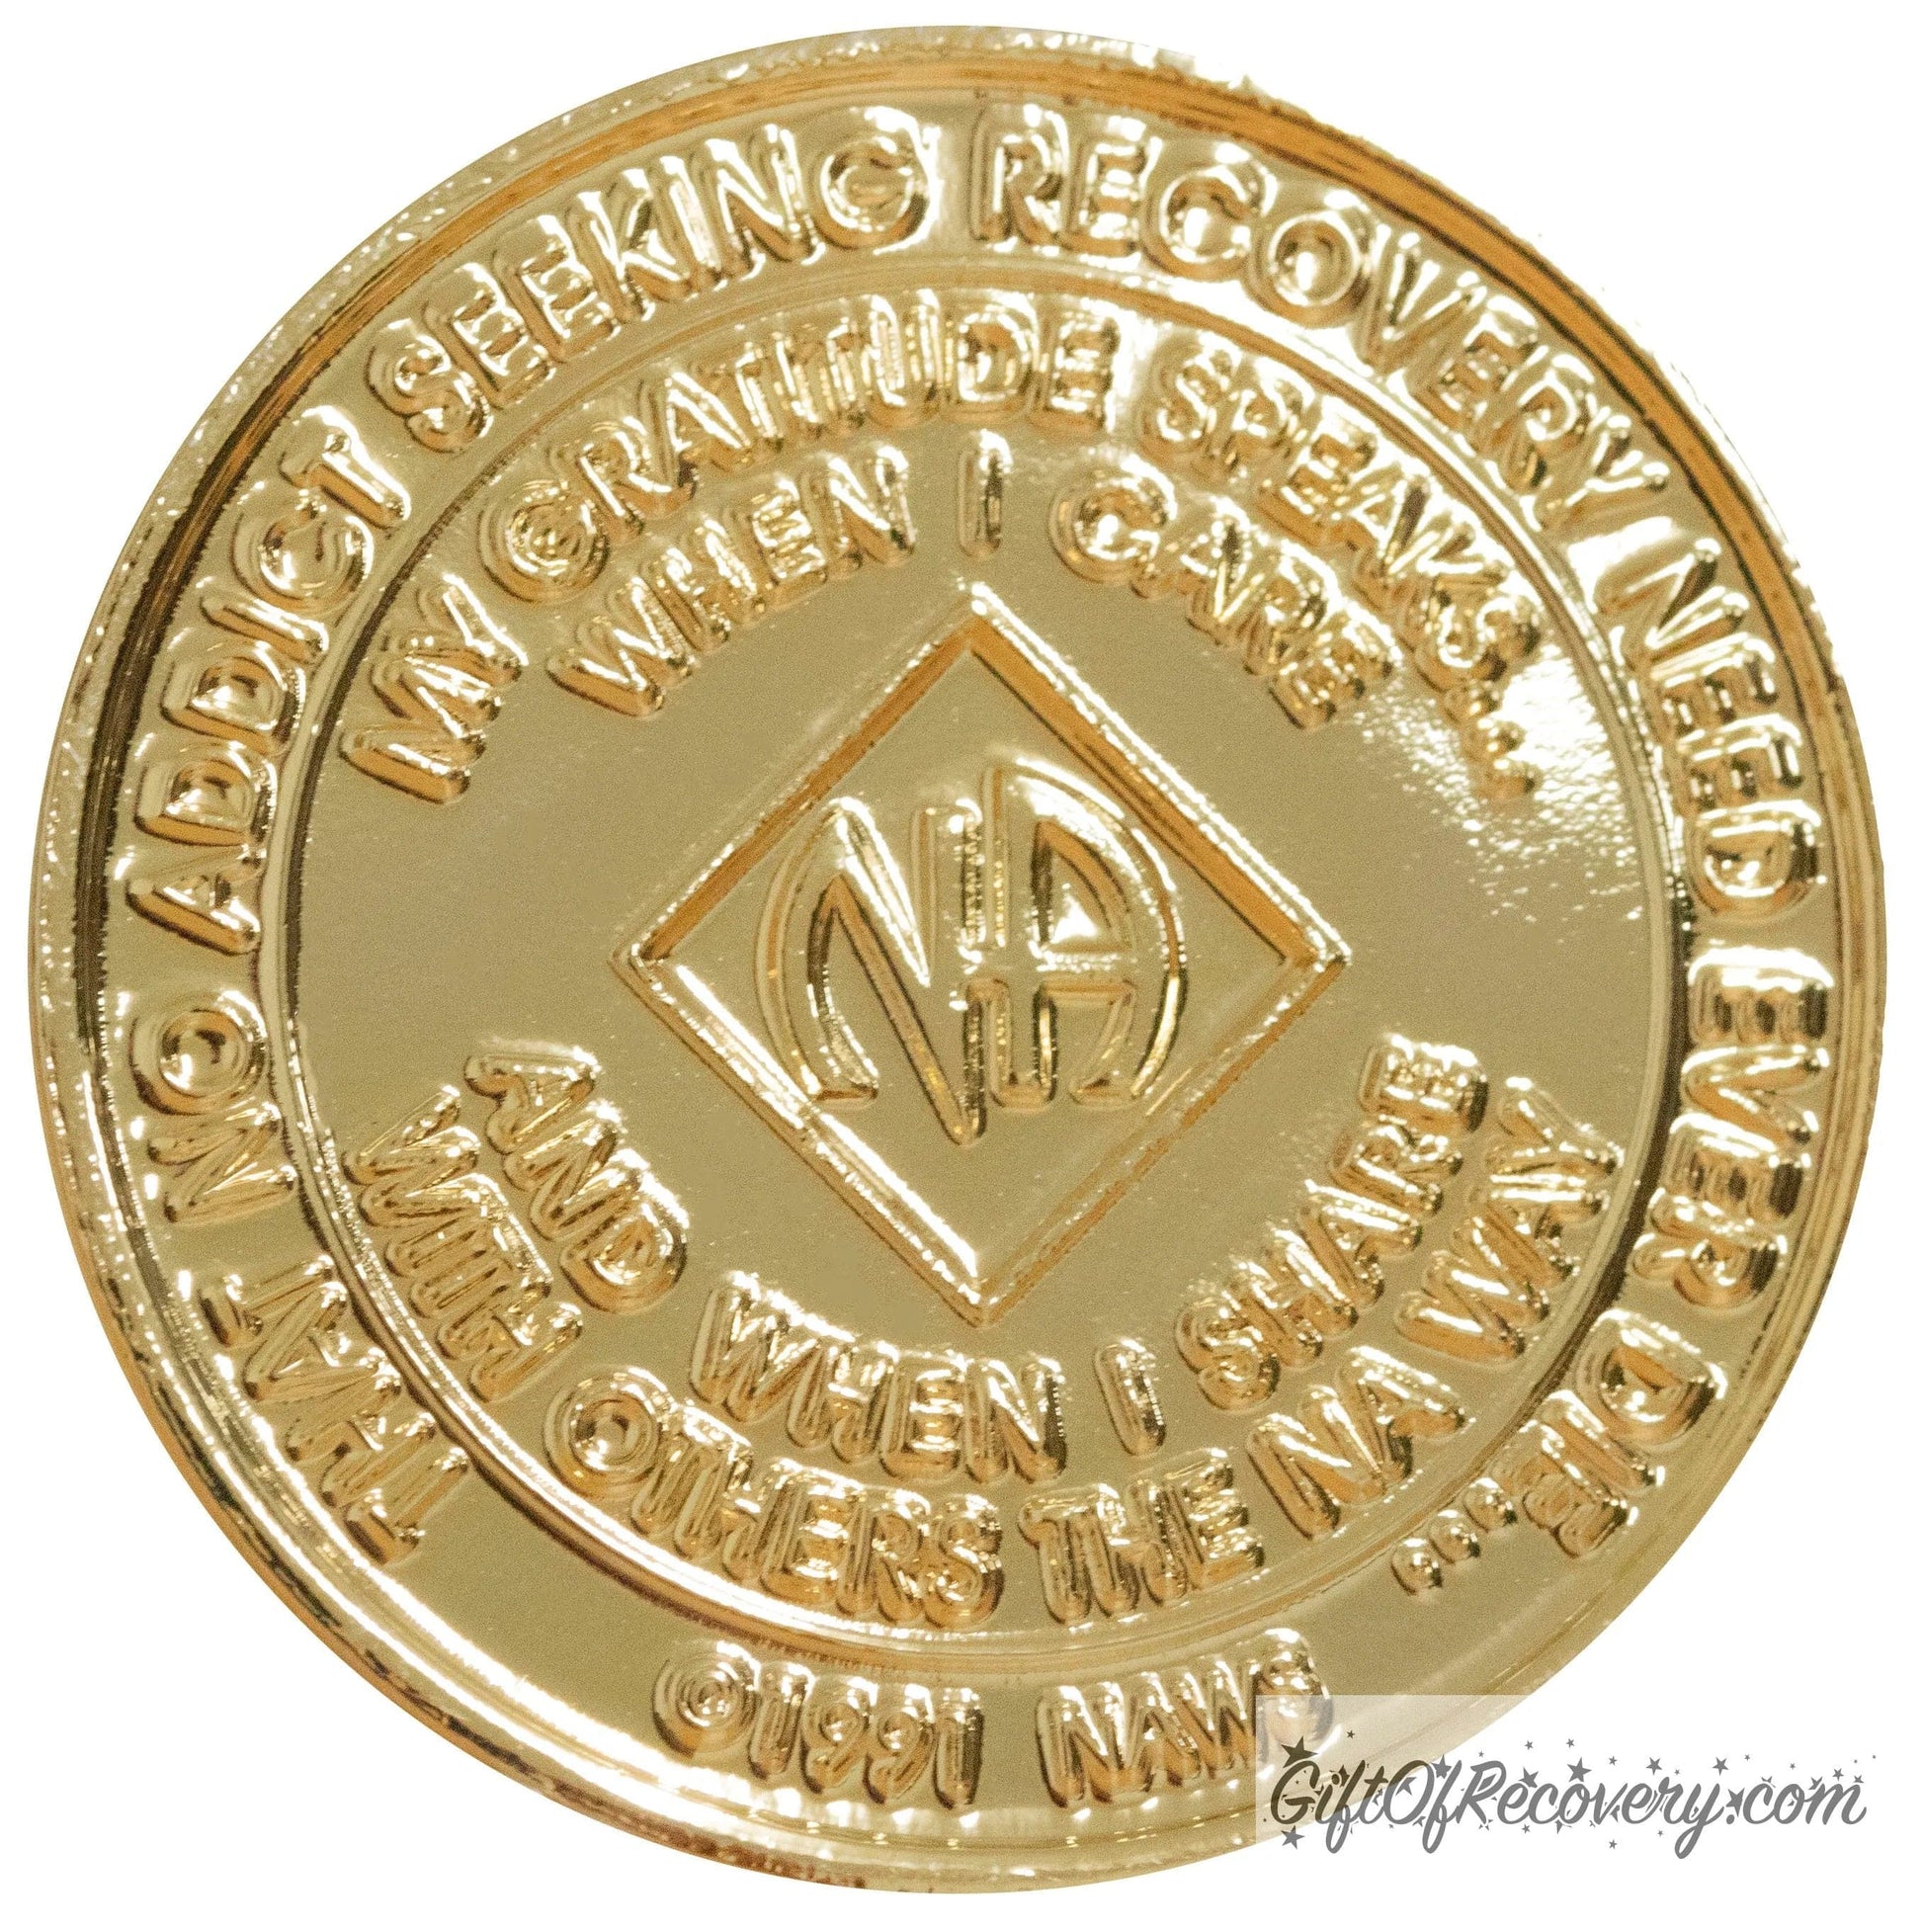 Clean Time Chip Narcotics Anonymous with Diamond Shaped Crystal (Gold)